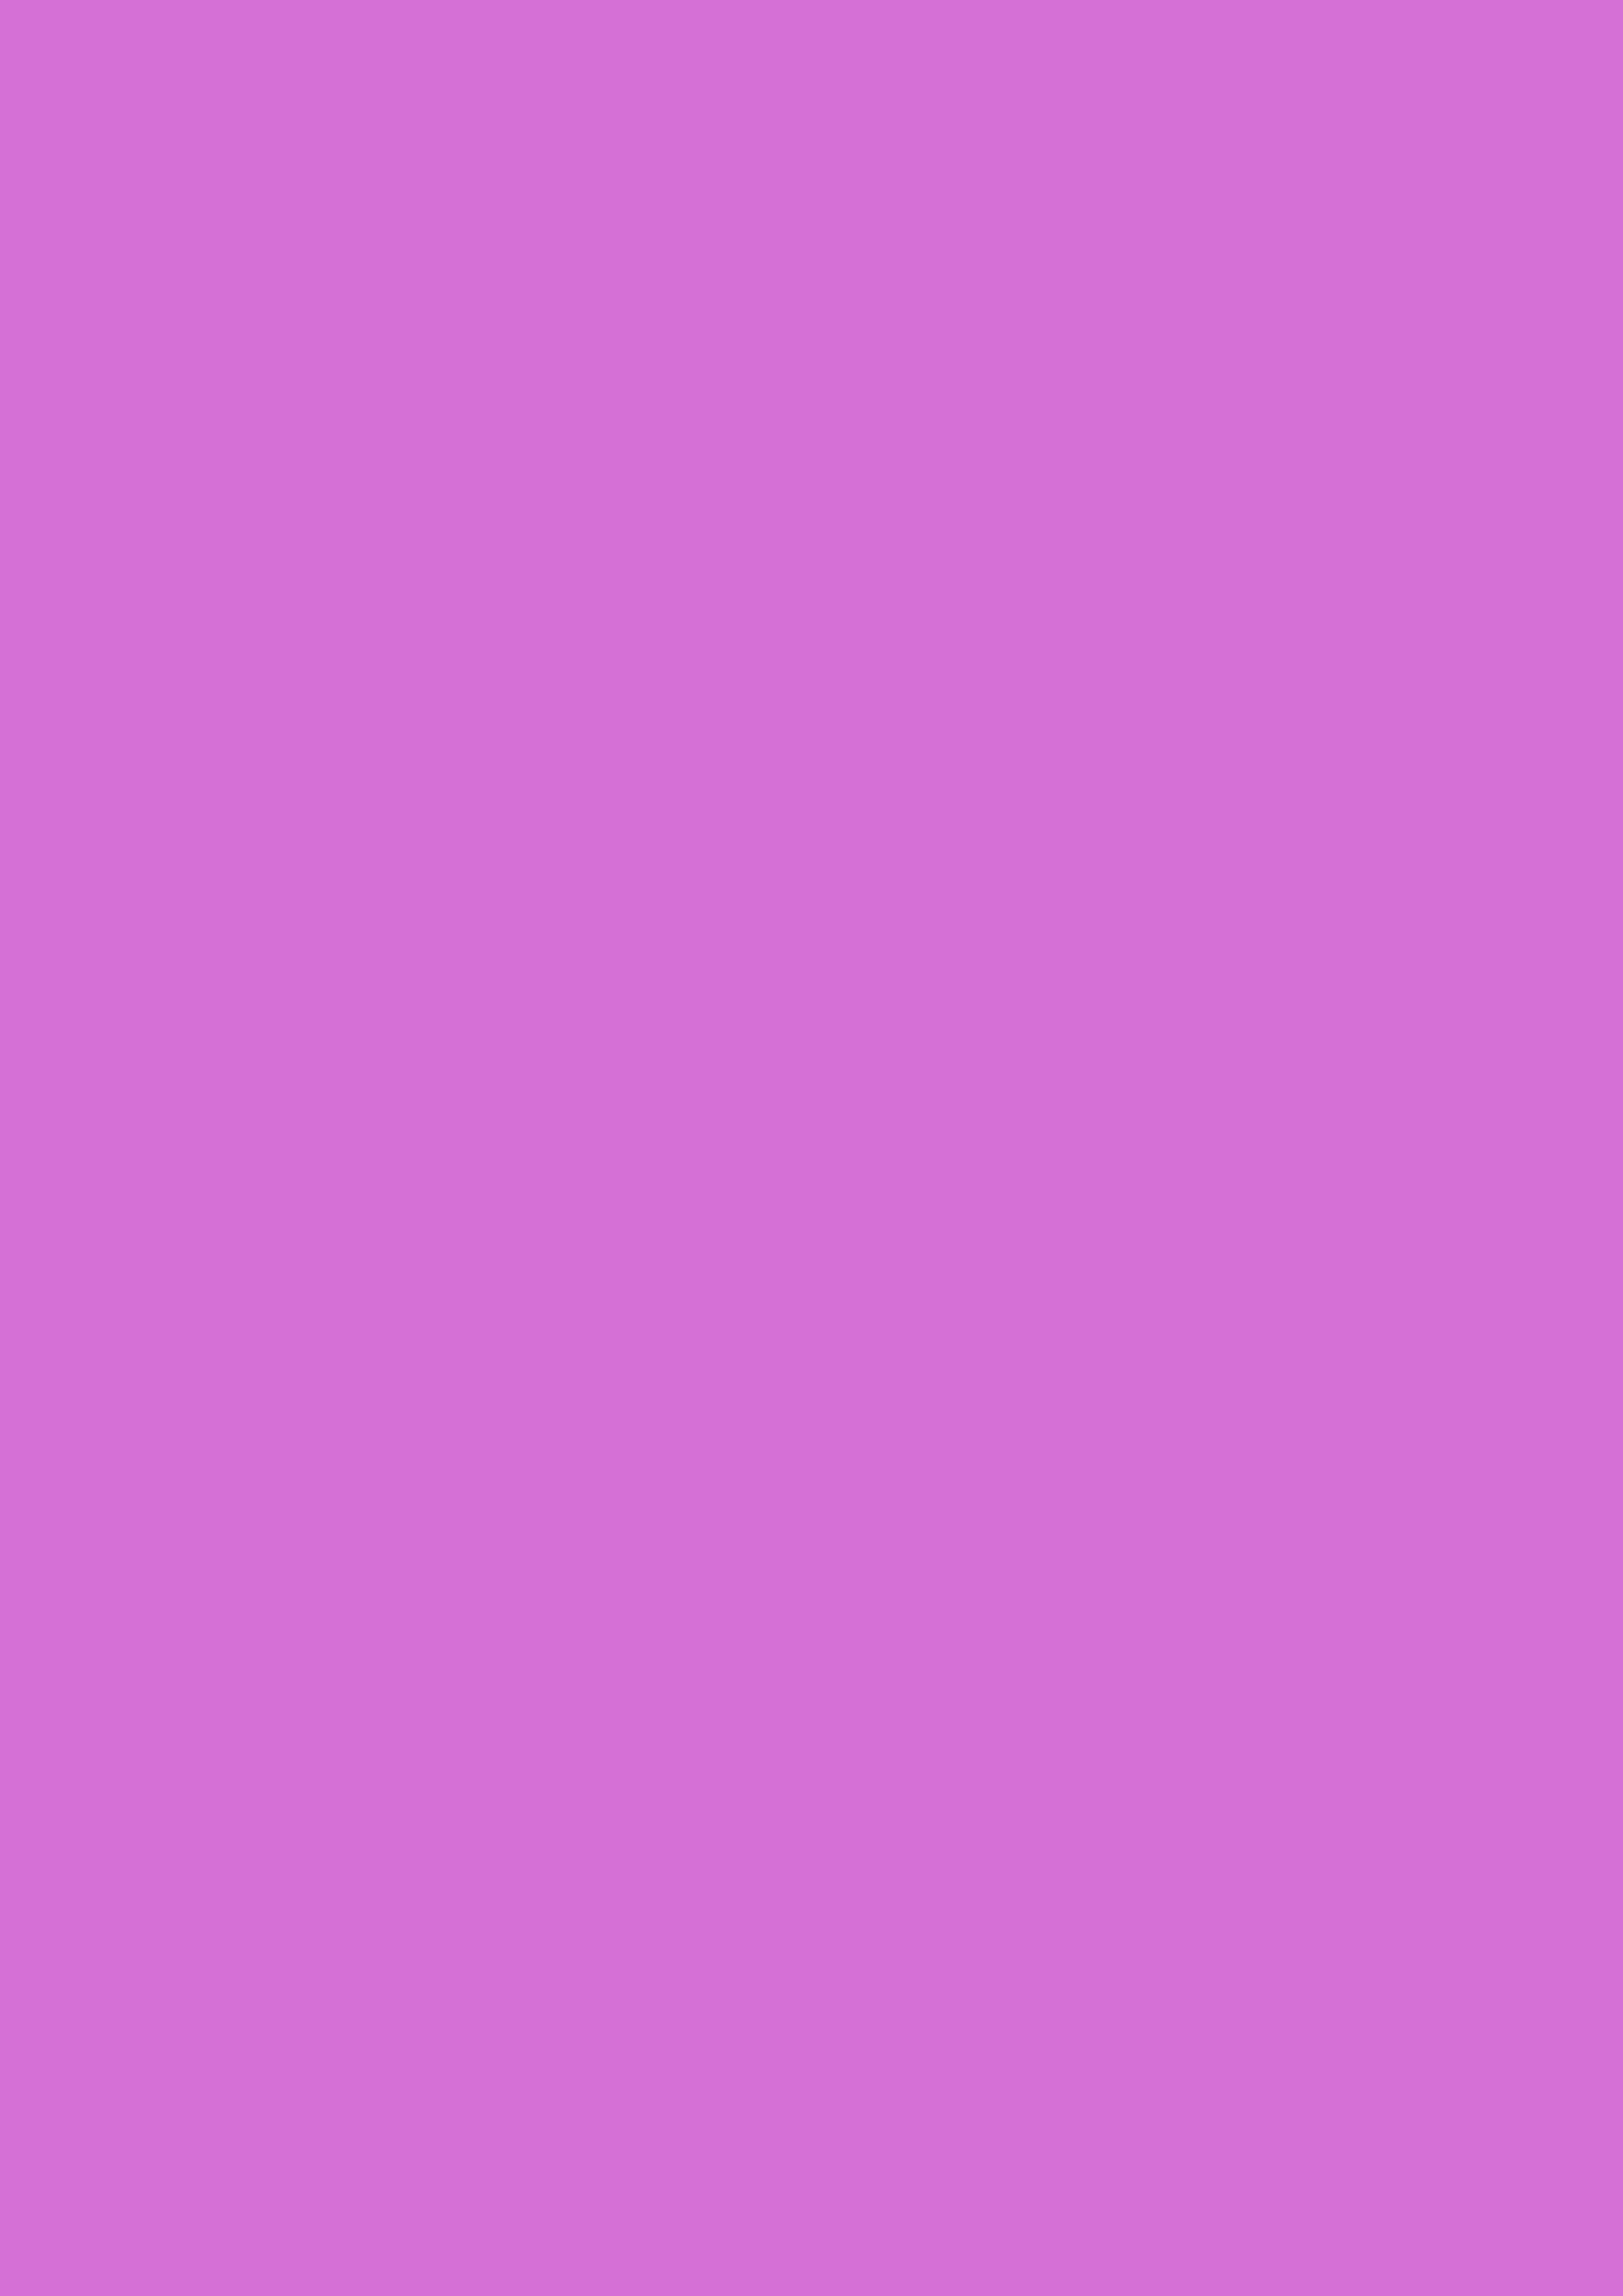 2480x3508 French Mauve Solid Color Background